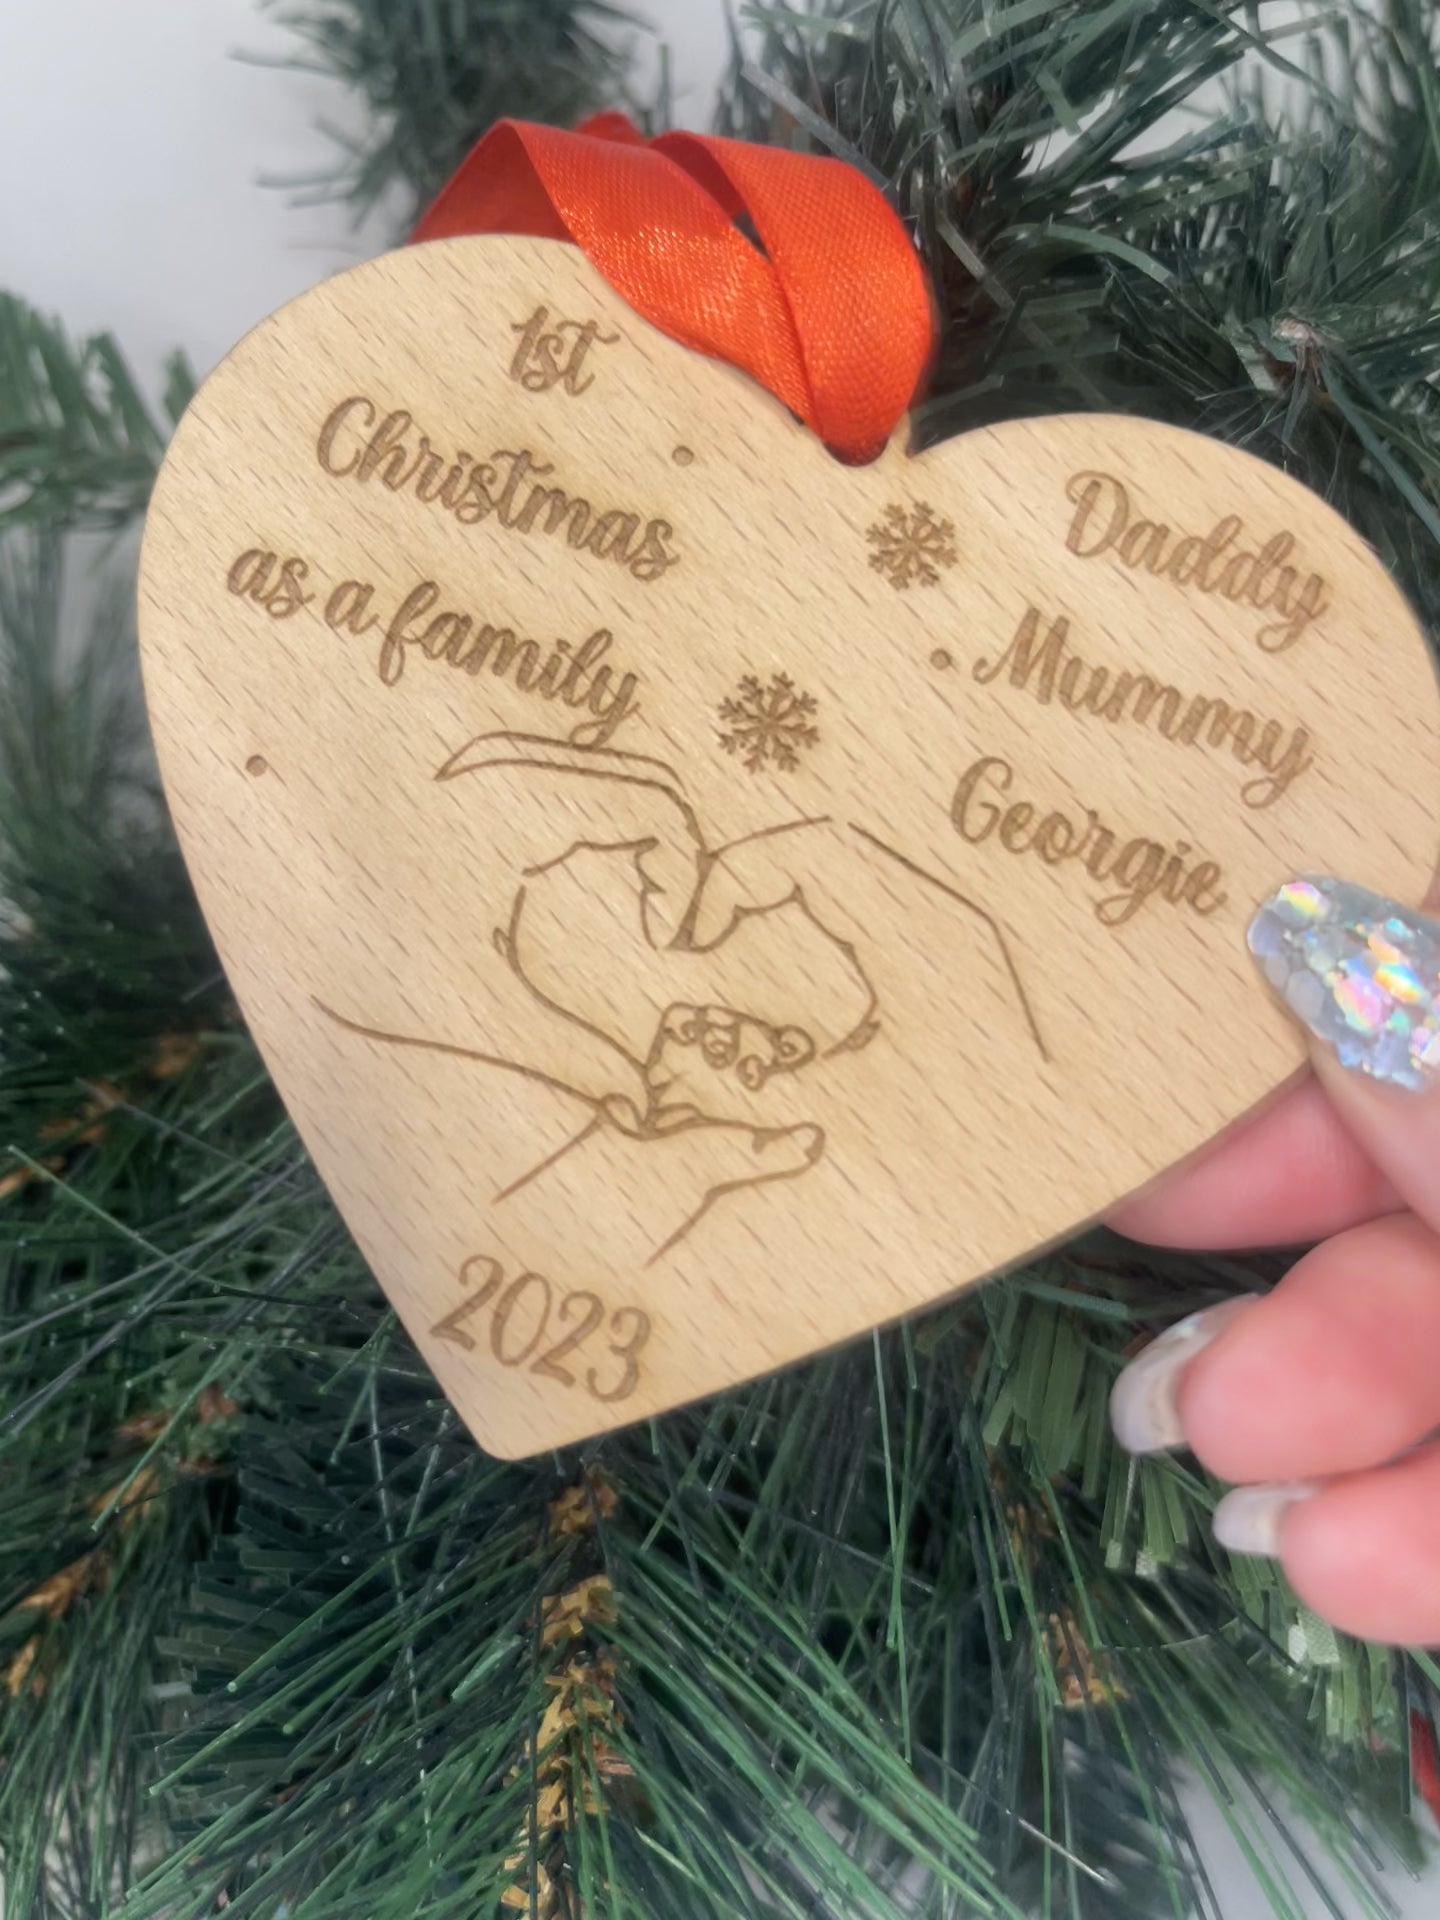 "Video: Explore Our Personalised Wooden Heart Shaped Christmas Bauble. Crafted from 4mm beech veneer wood, this ornament is engraved with '1st Christmas as a Family' and your chosen names. Watch as the heartwarming image of intertwined hands, year, and red ribbon come to life, adding a festive touch to any tree.